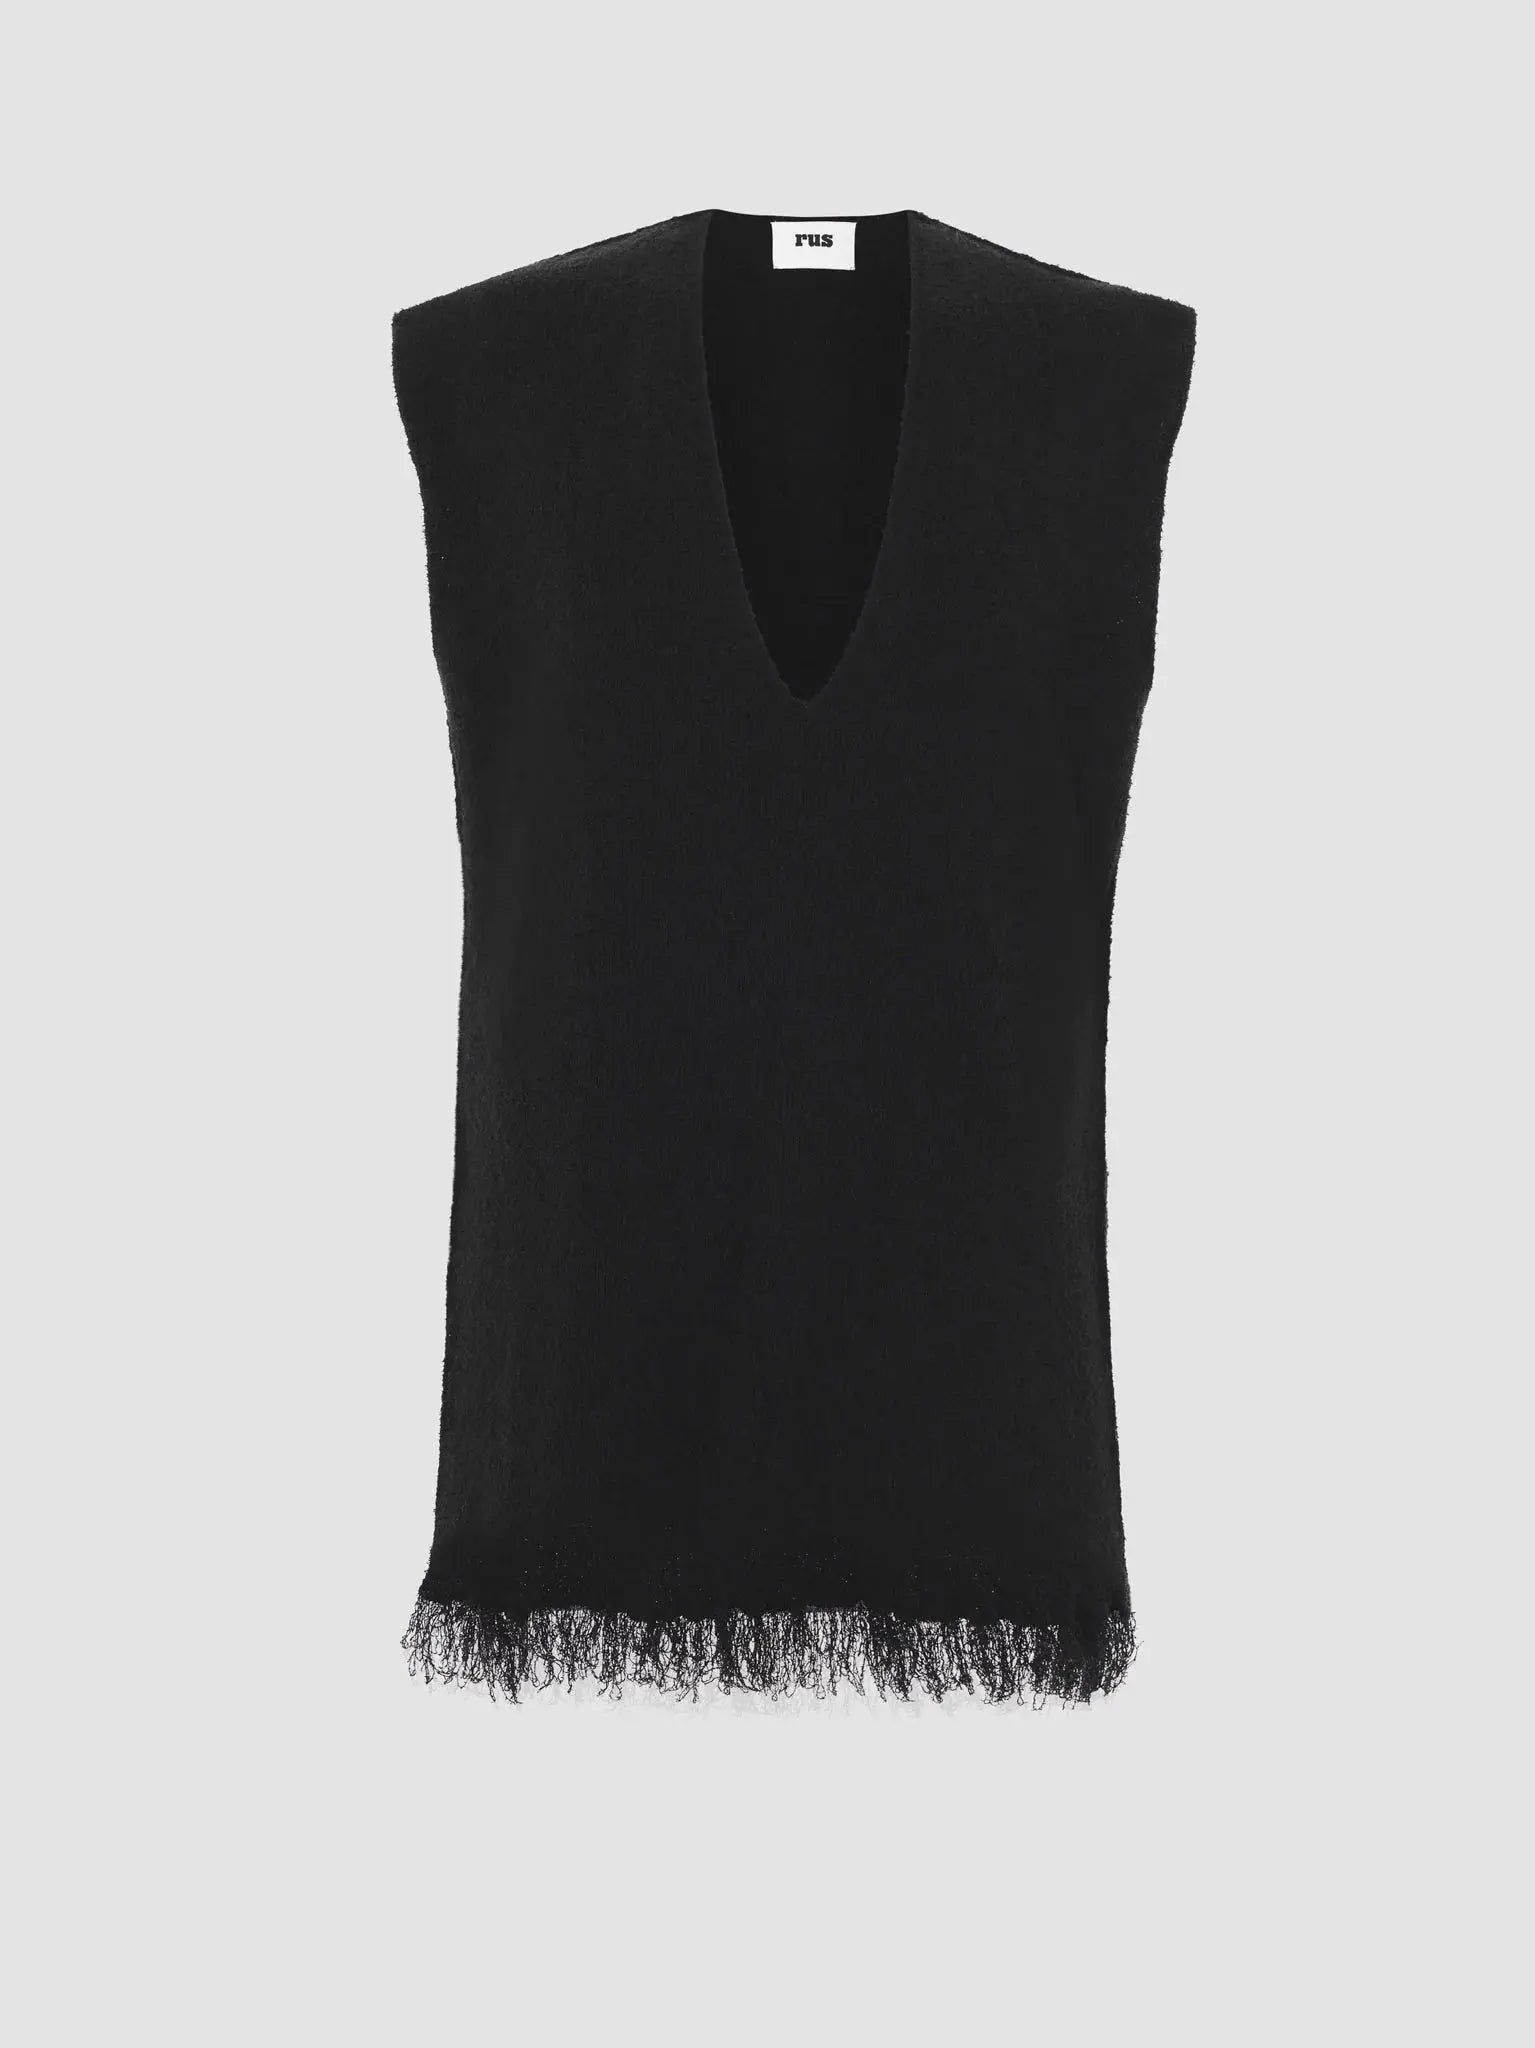 A sleeveless black V-neck Katsura Top Ink with a slightly frayed hem at the bottom, displayed against a plain light gray background. The top has a clean, minimalist design and is labeled with a small white tag at the inner back of the neckline. Available exclusively at Bassalstore in Barcelona by Rus.